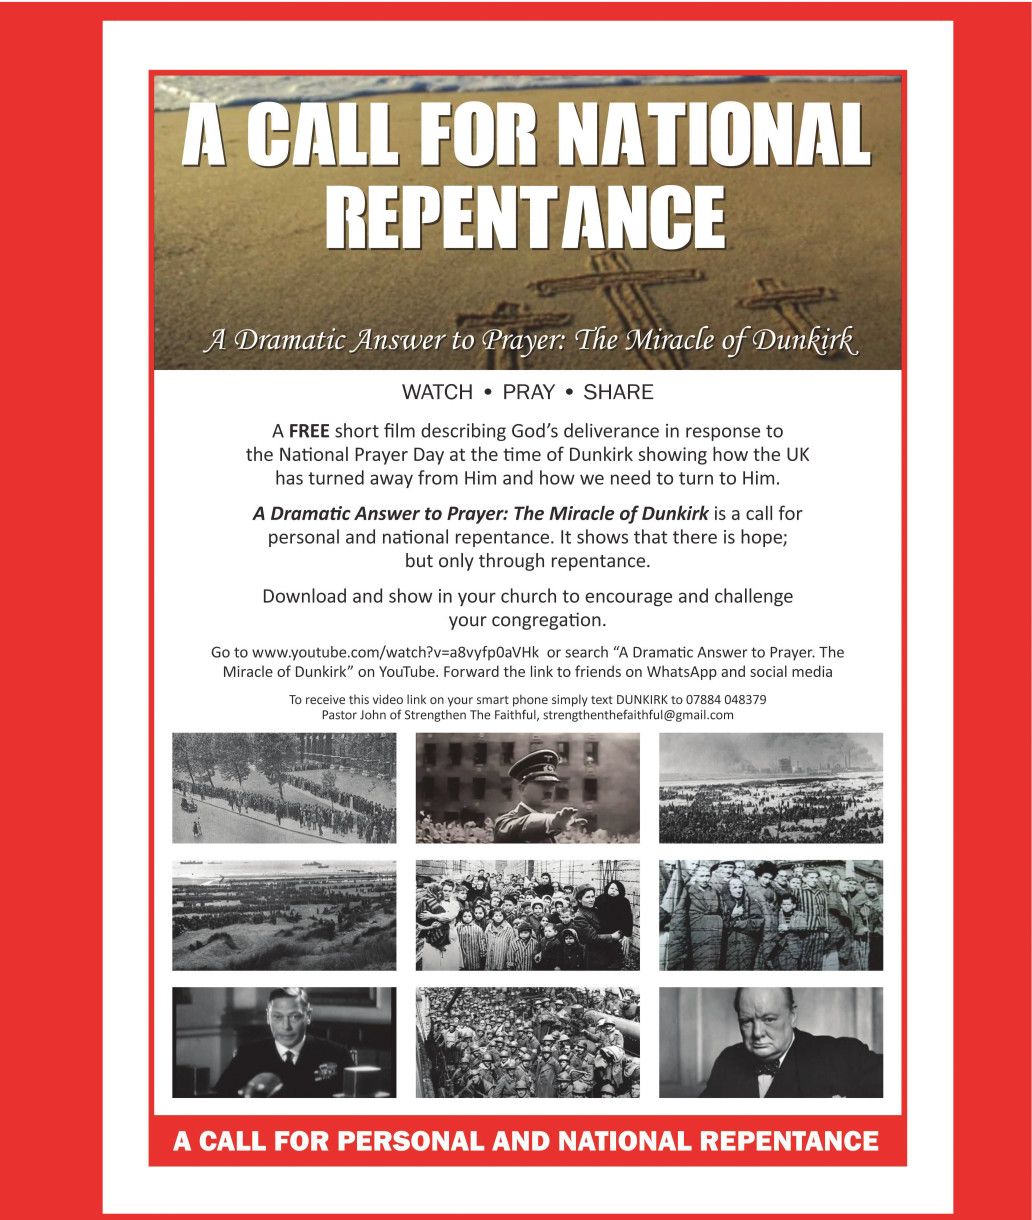 A call for national repentance